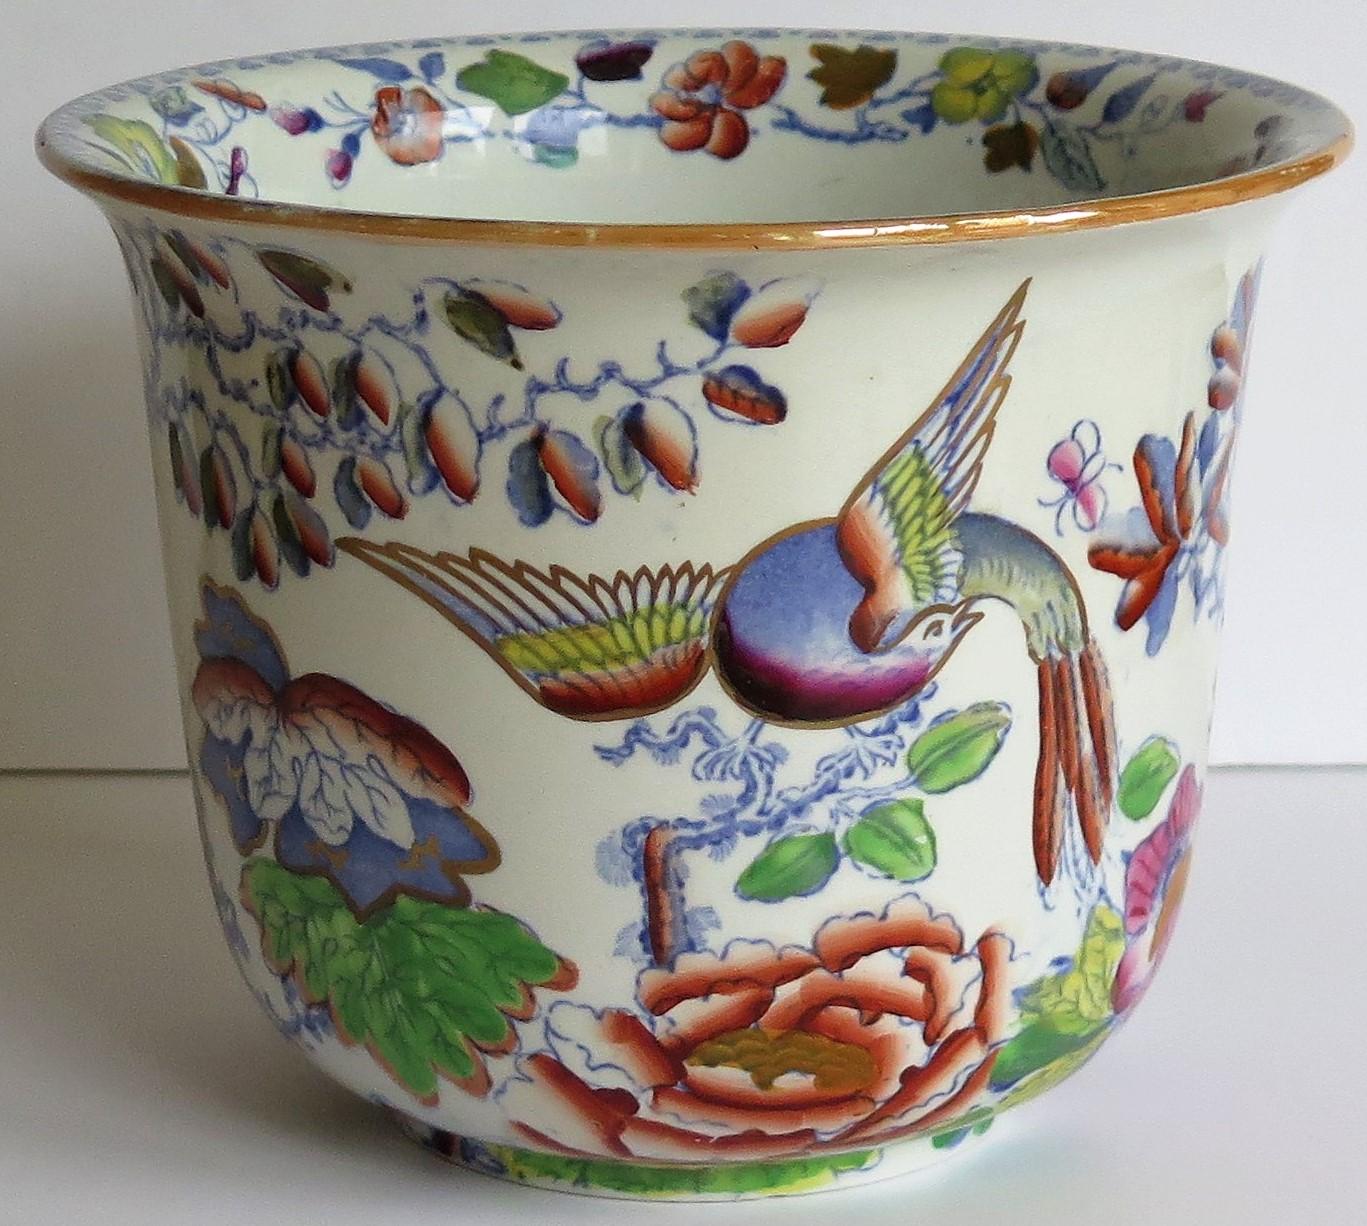 This is ironstone Jardinière or planter in the Flying Bird pattern, made by Mason's Ironstone of Lane Delph, Staffordshire, England, during the 19th century, circa 1900.

Mason's ironstone jardinières and planters tend to be rare items and hard to